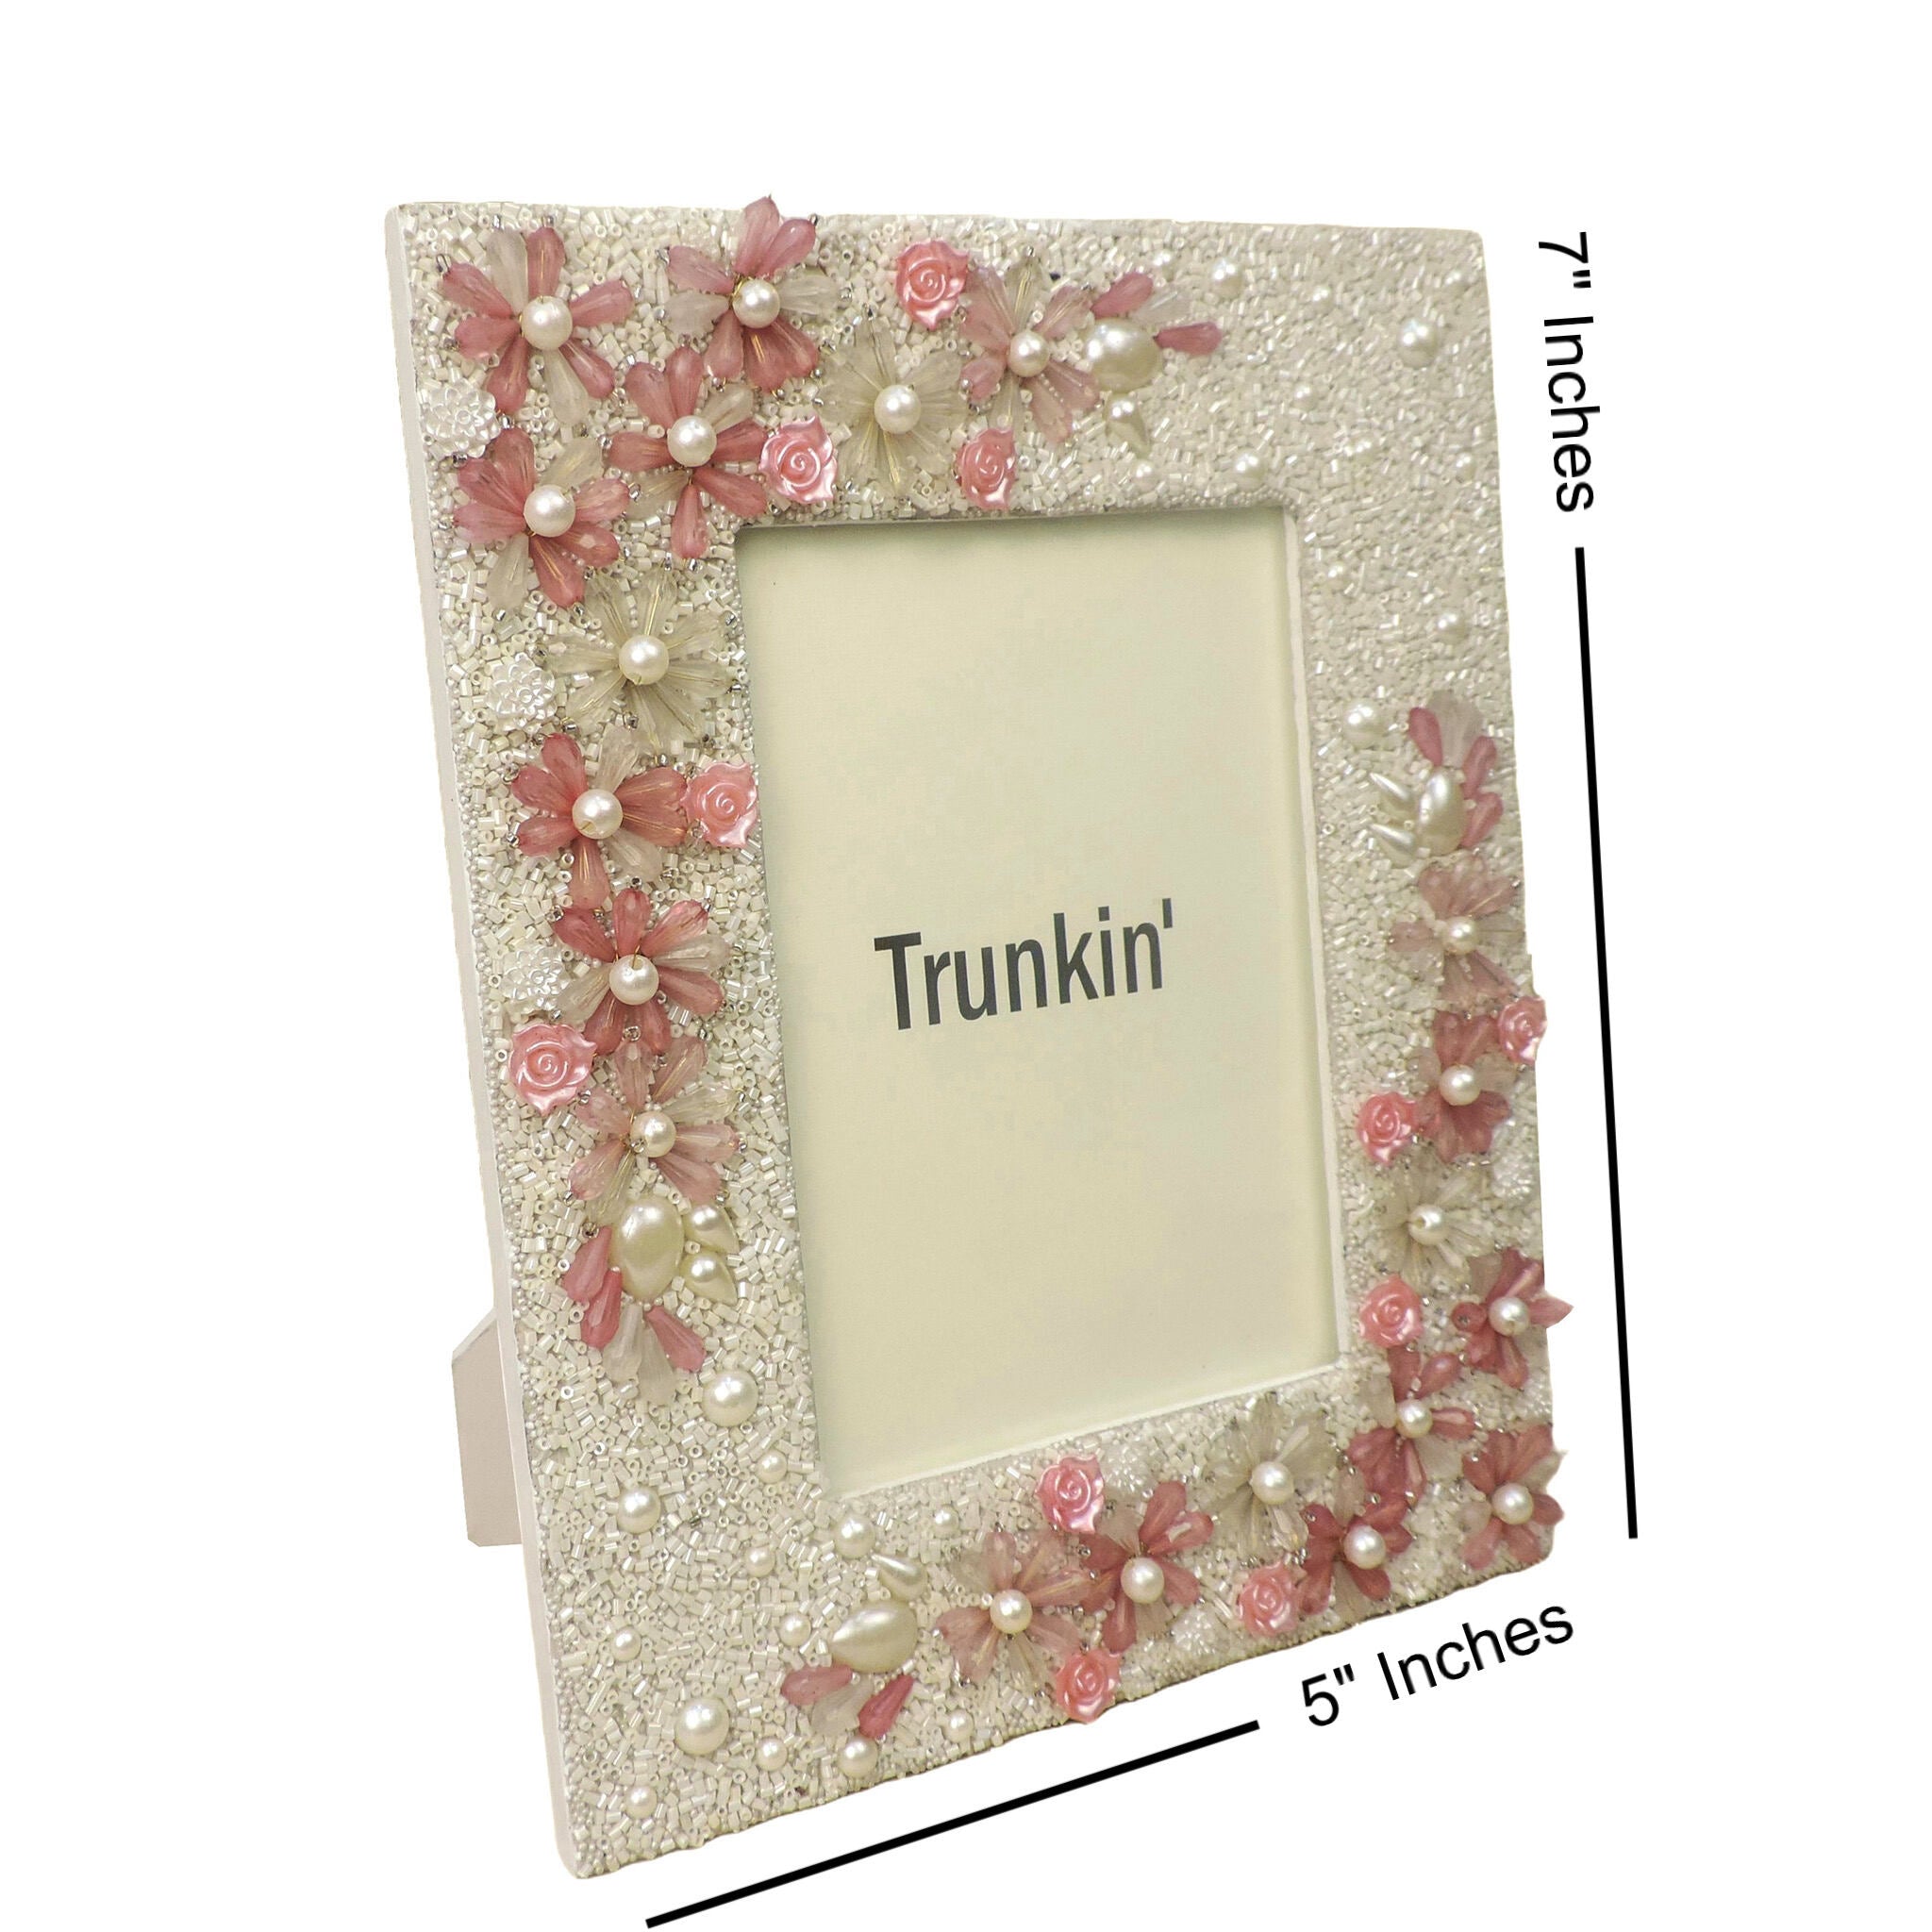 Floral Beaded Photo Frame in White Pink